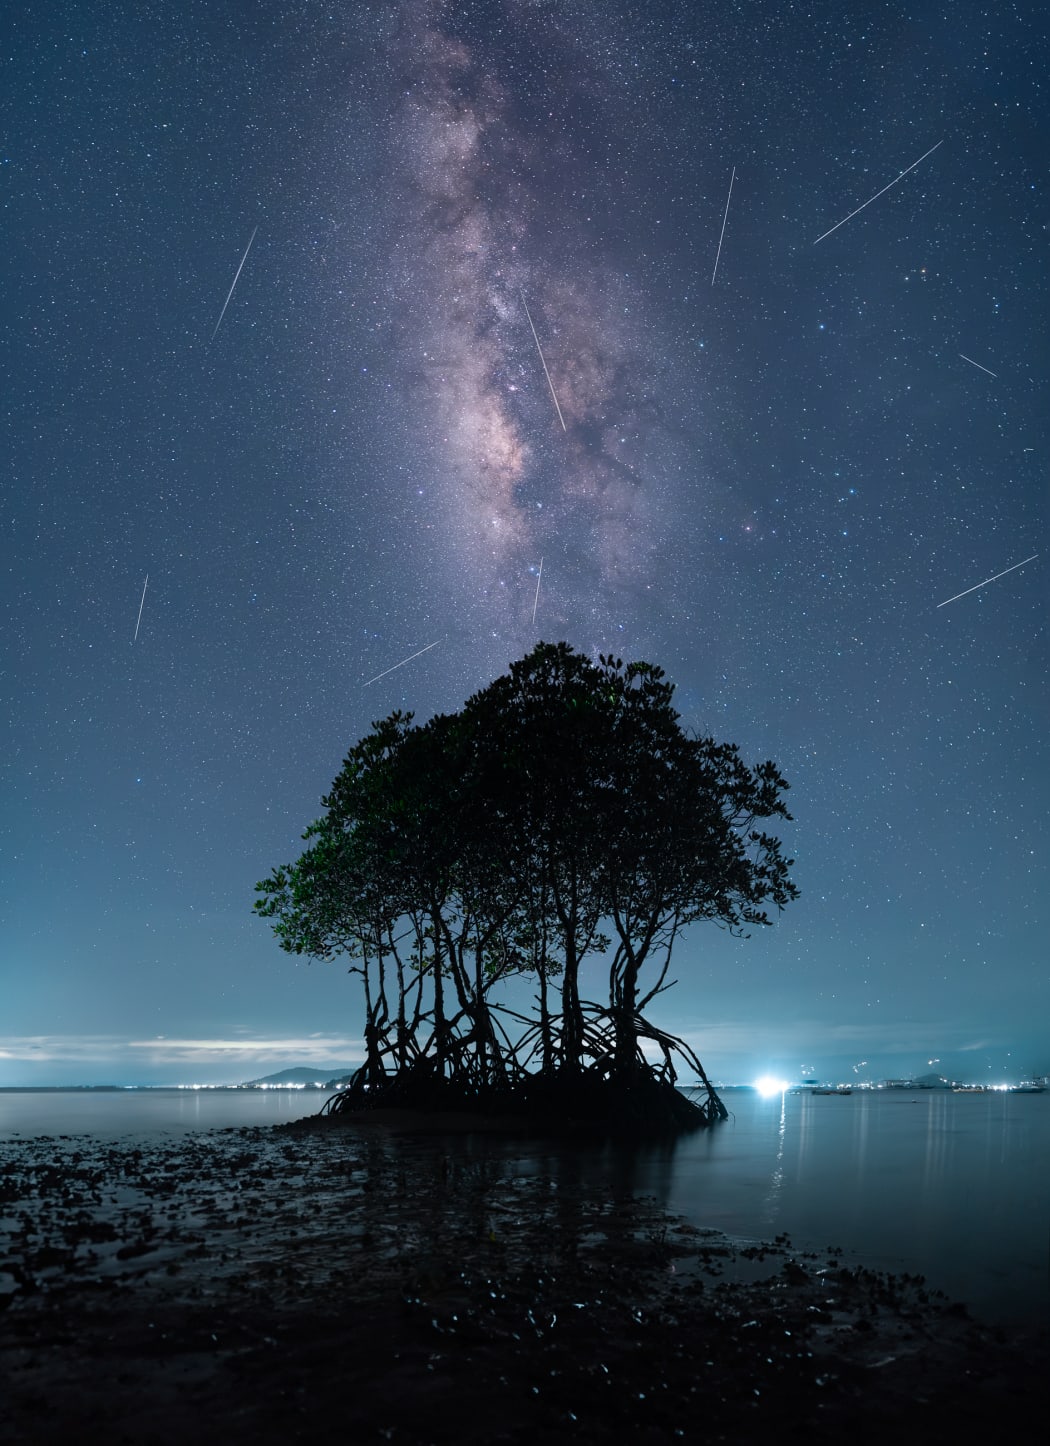 An image from the Mangrove Photography Awards, run by the Mangrove Action Project.